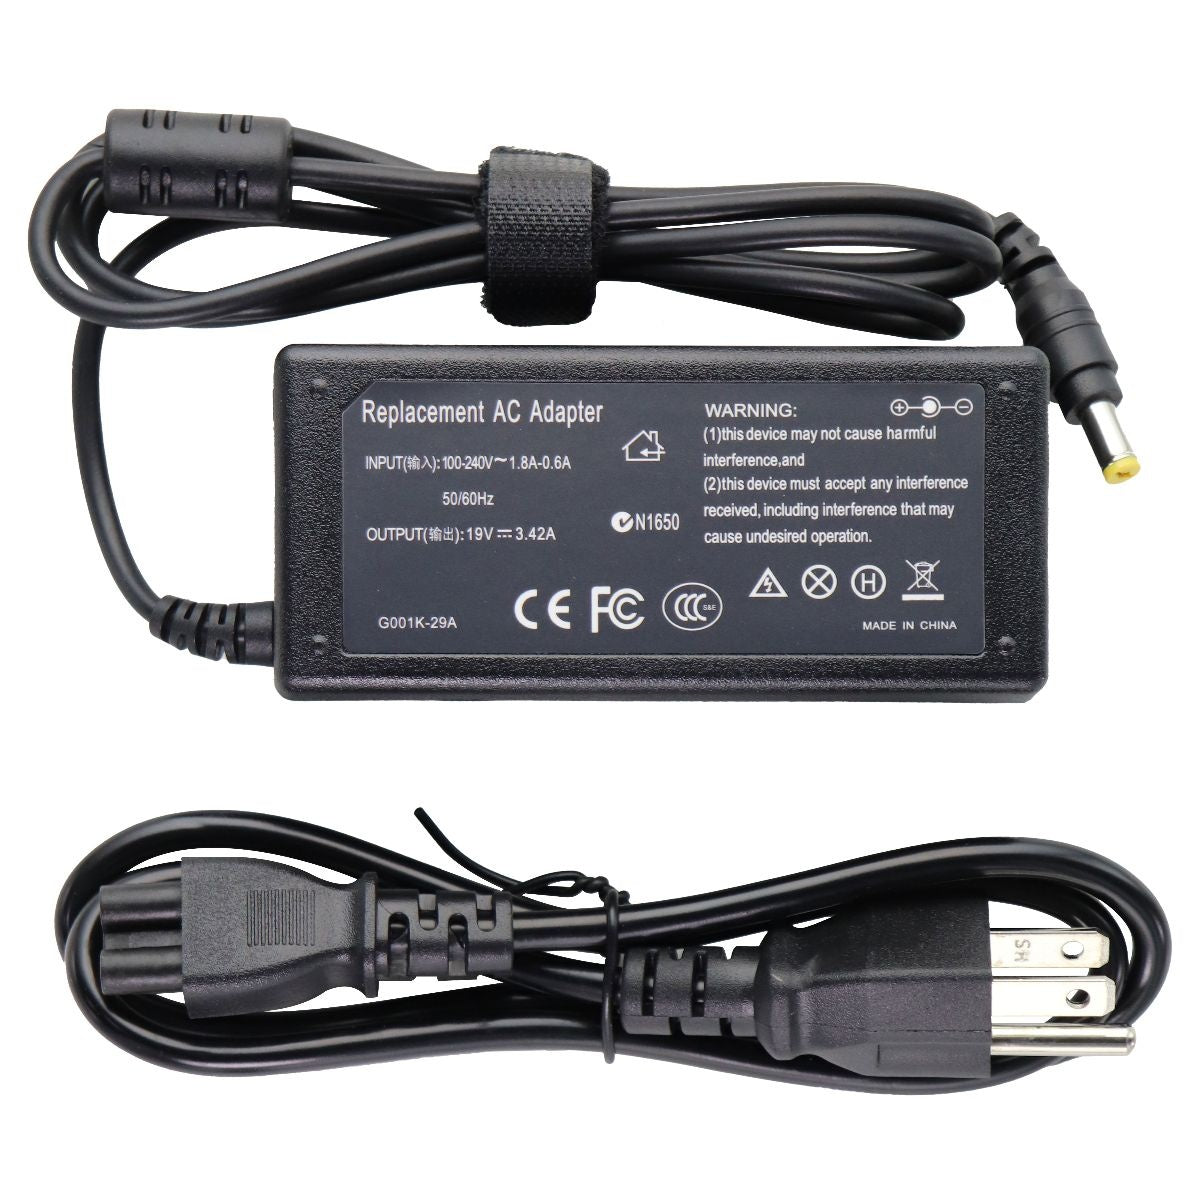 Replacement (19V/3.42A) AC Adapter Wall Charger Power Supply - Black (C011K-29A) Multipurpose Batteries & Power - Multipurpose AC to DC Adapters Unbranded    - Simple Cell Bulk Wholesale Pricing - USA Seller